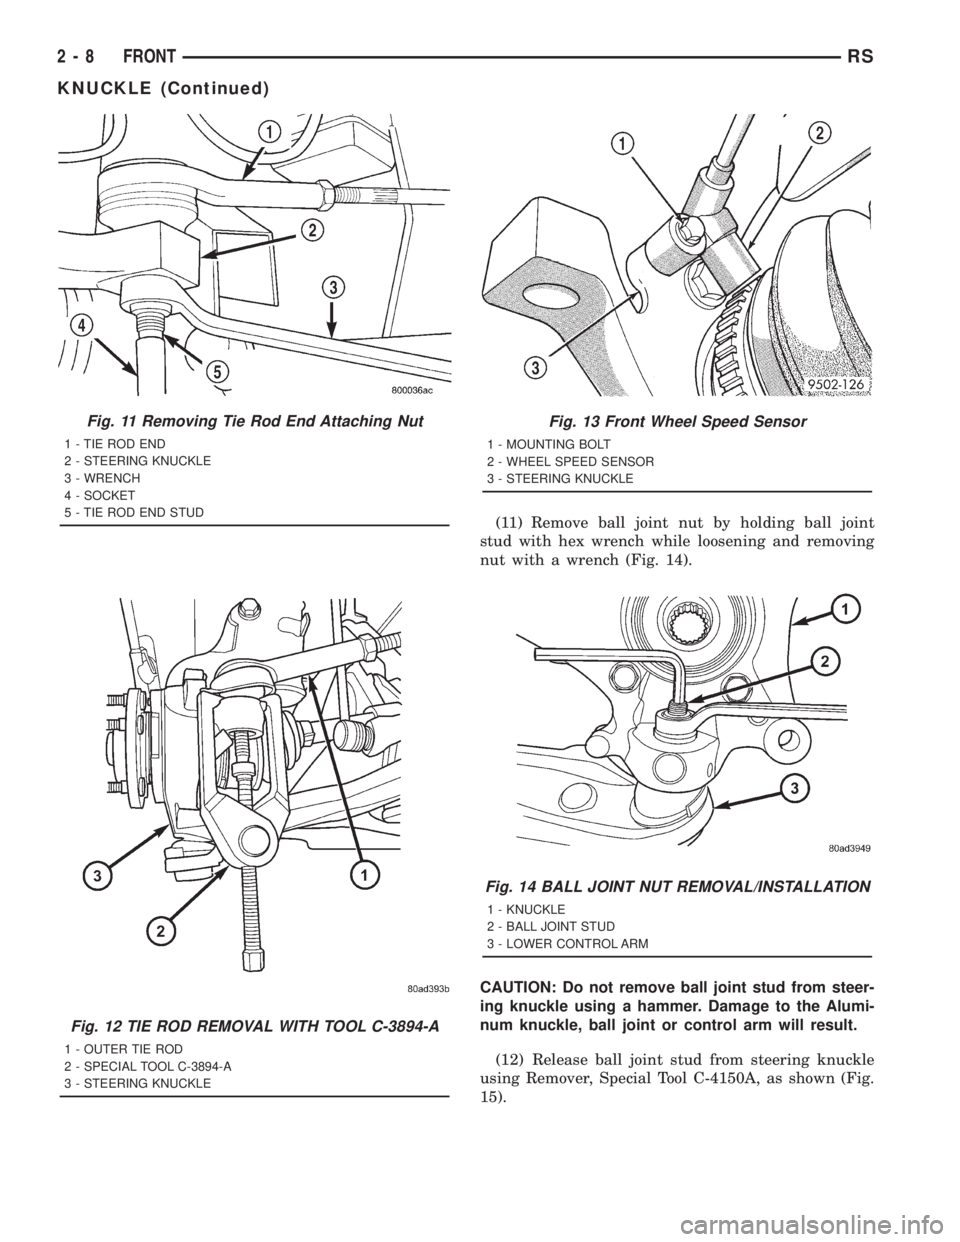 CHRYSLER VOYAGER 2001  Service Manual (11) Remove ball joint nut by holding ball joint
stud with hex wrench while loosening and removing
nut with a wrench (Fig. 14).
CAUTION: Do not remove ball joint stud from steer-
ing knuckle using a h